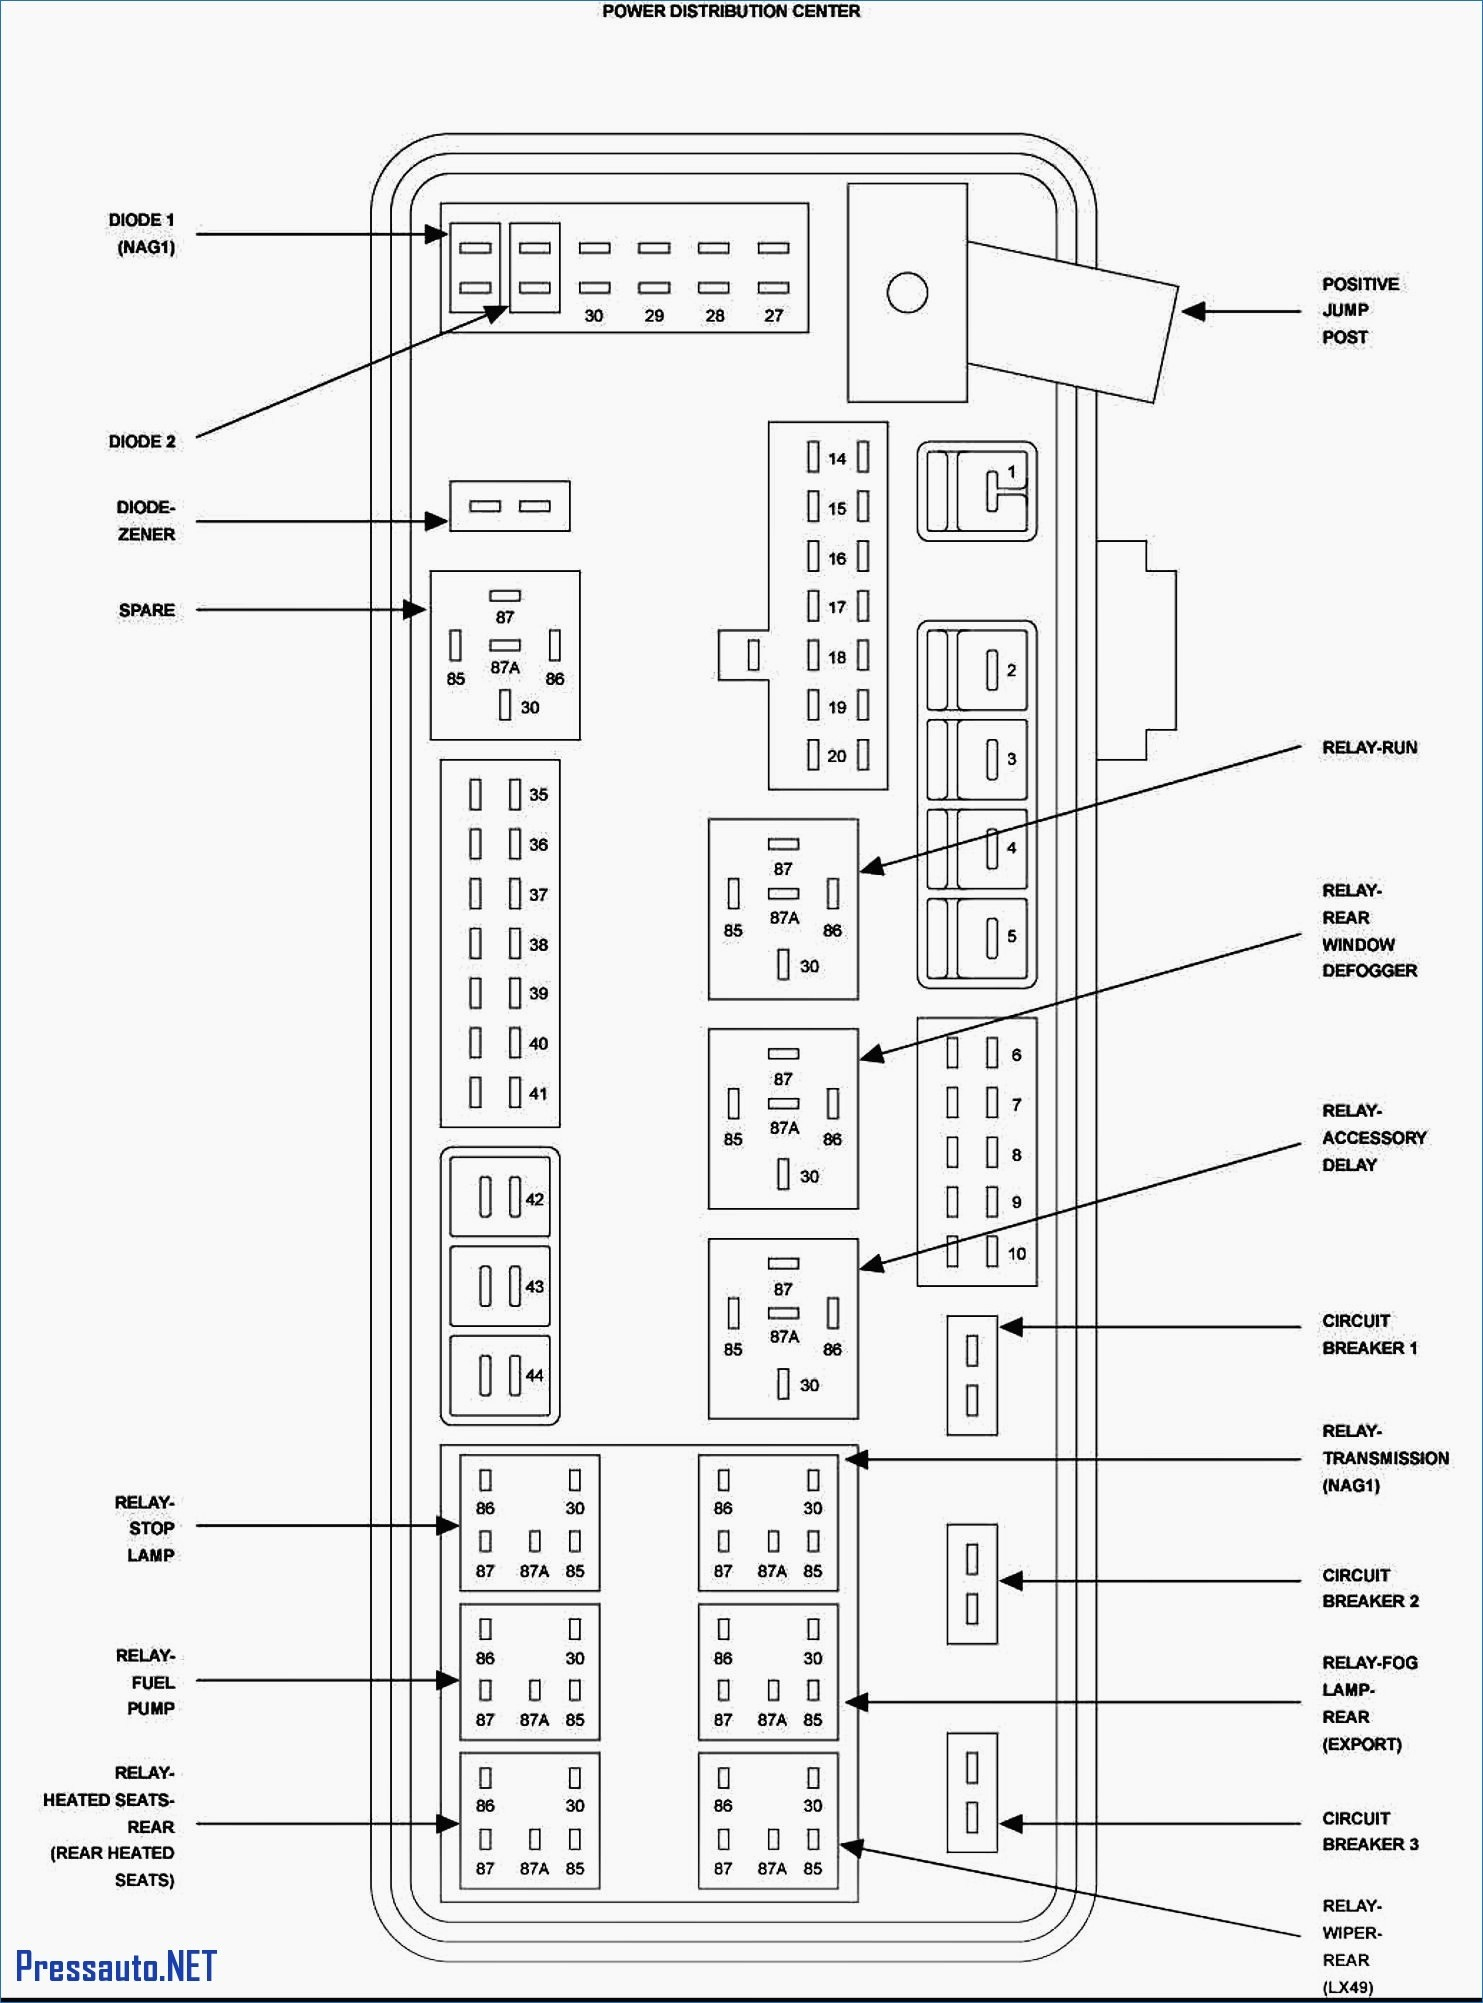 Fuse Box Chrysler Town And Country | Wiring Diagram - 2005 Chrysler Town And Country Wiring Diagram Pdf